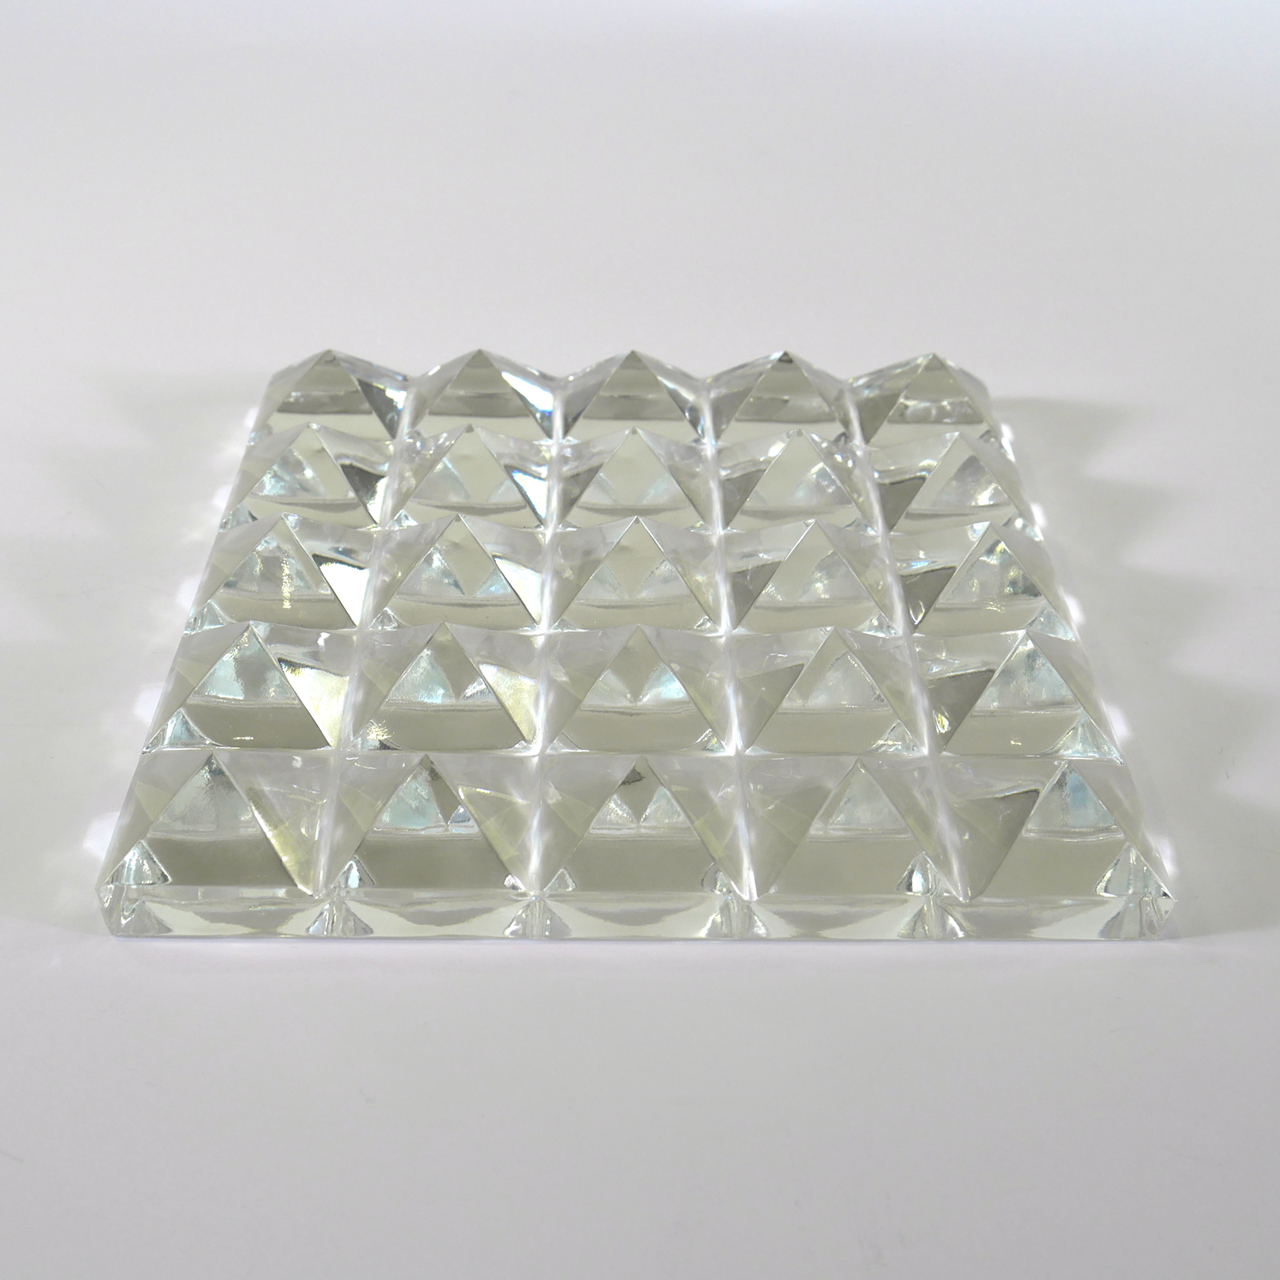 Glass tile approx. 17x17cm clear - structure with 25 pyramids